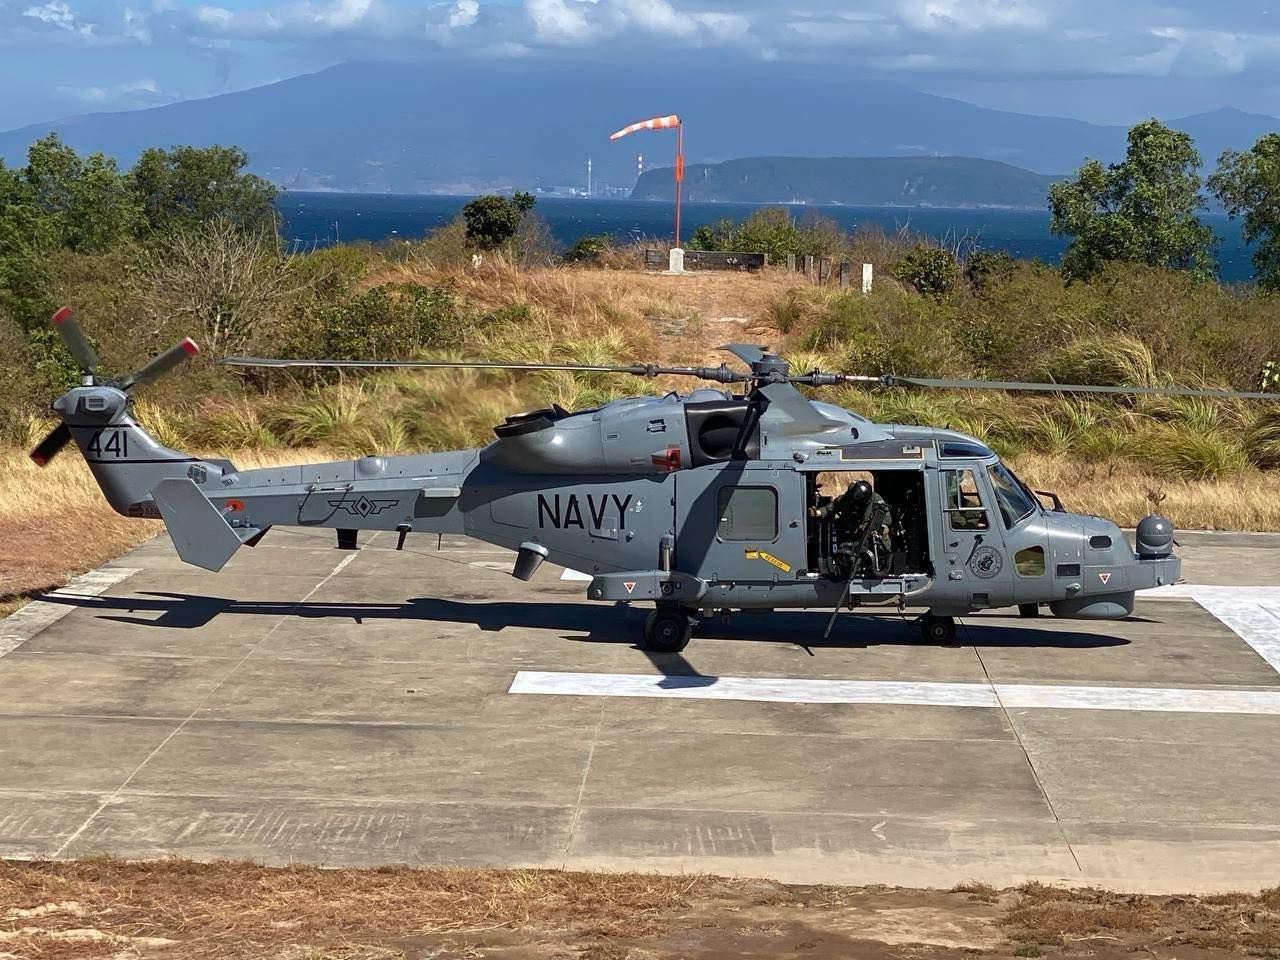 Philippines Navy Installed Heavy Machine Guns on Its AW-159 Wildcat Helicopters